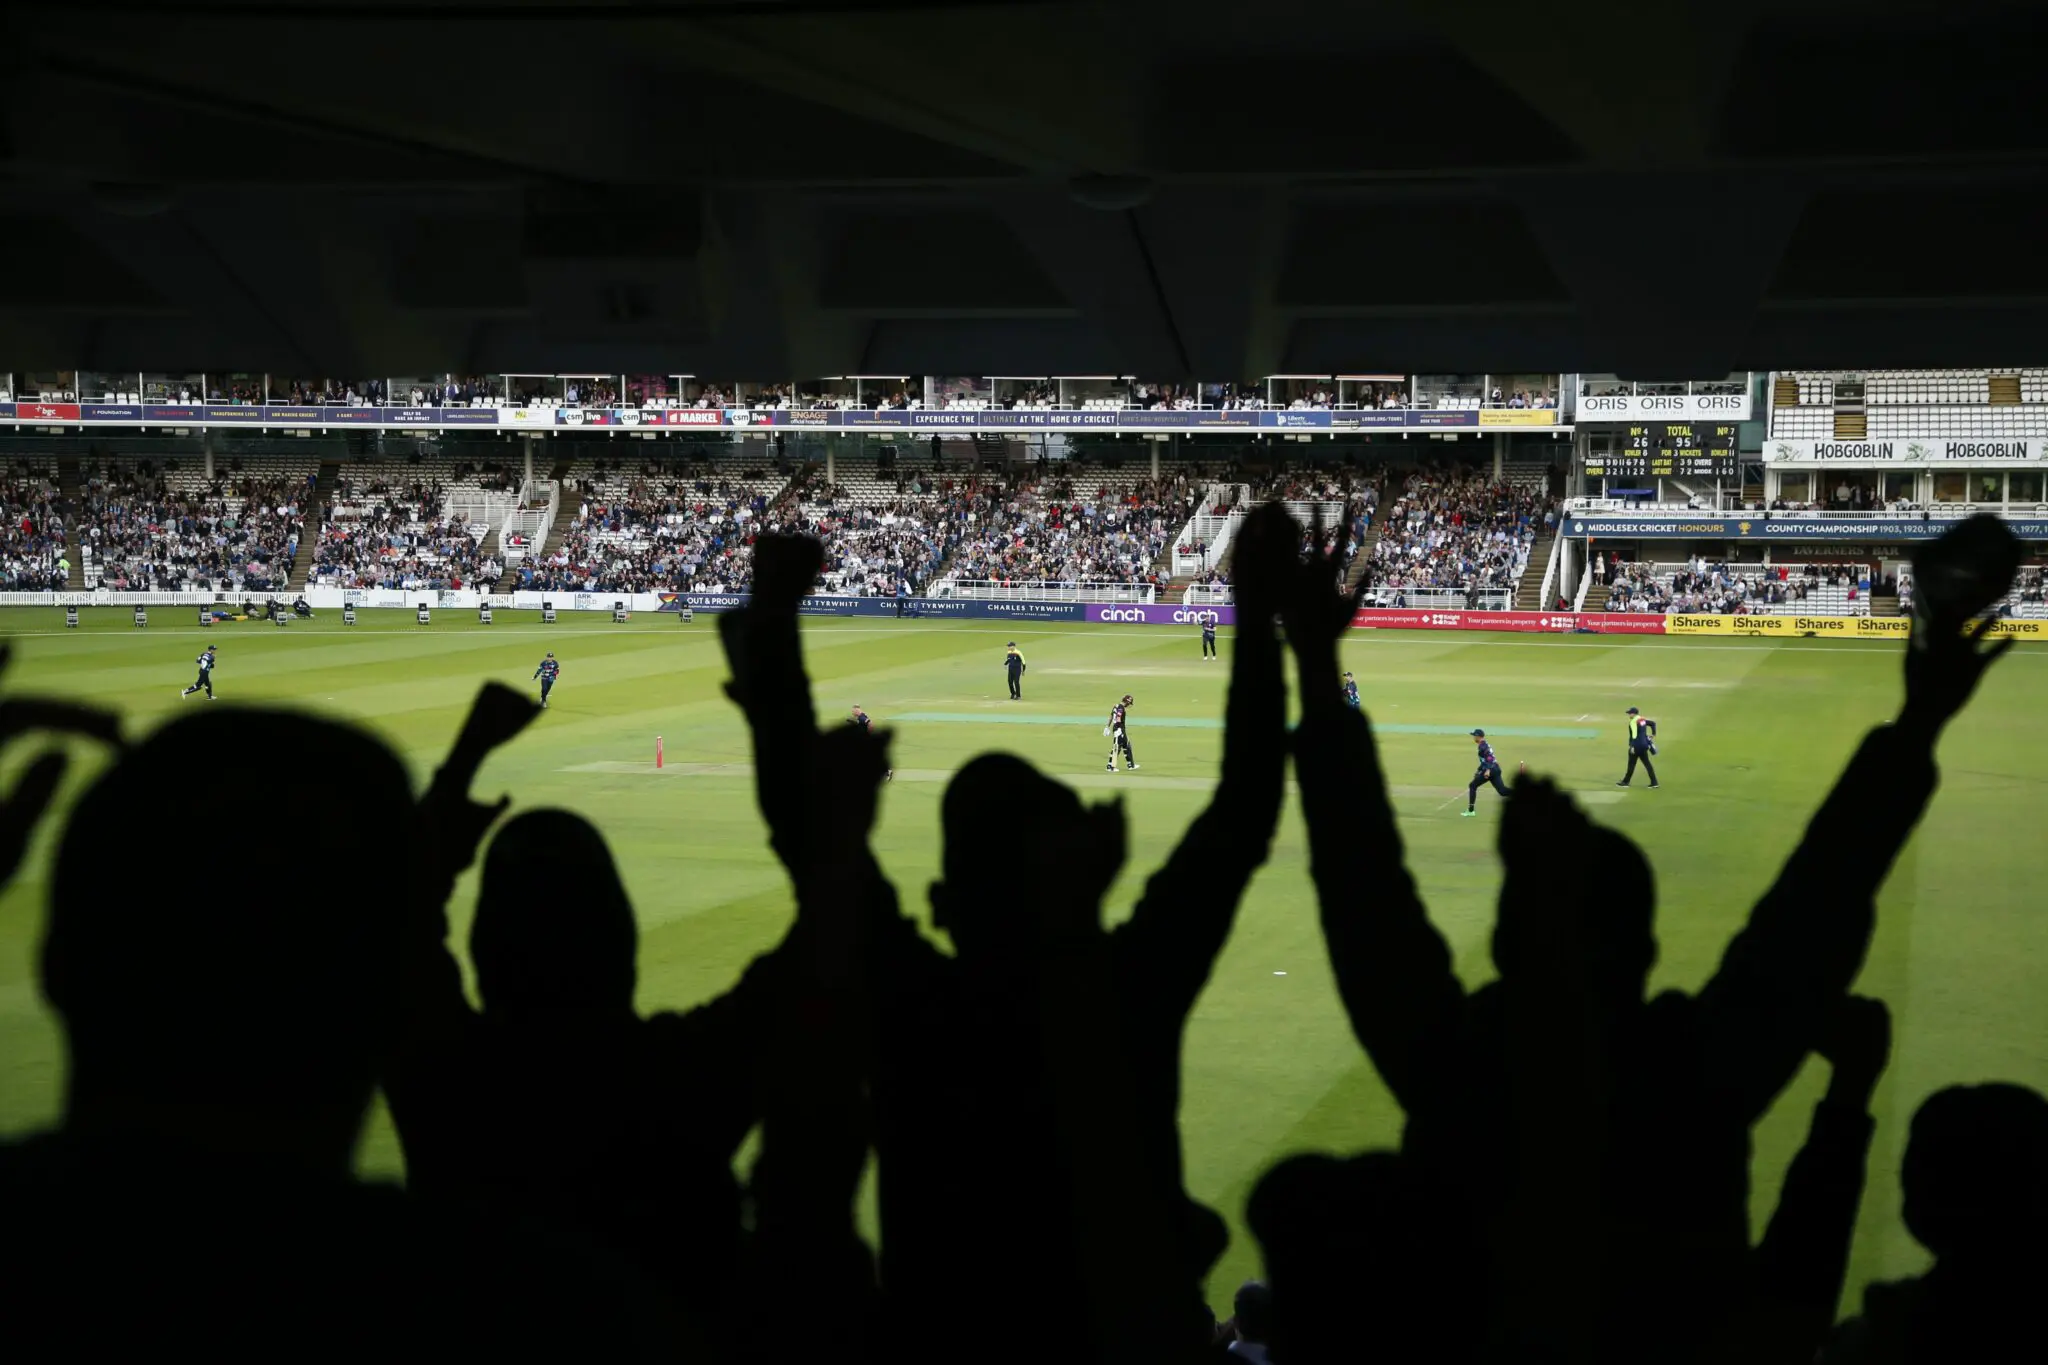 Crowd cheerying in the stands during a cricket match